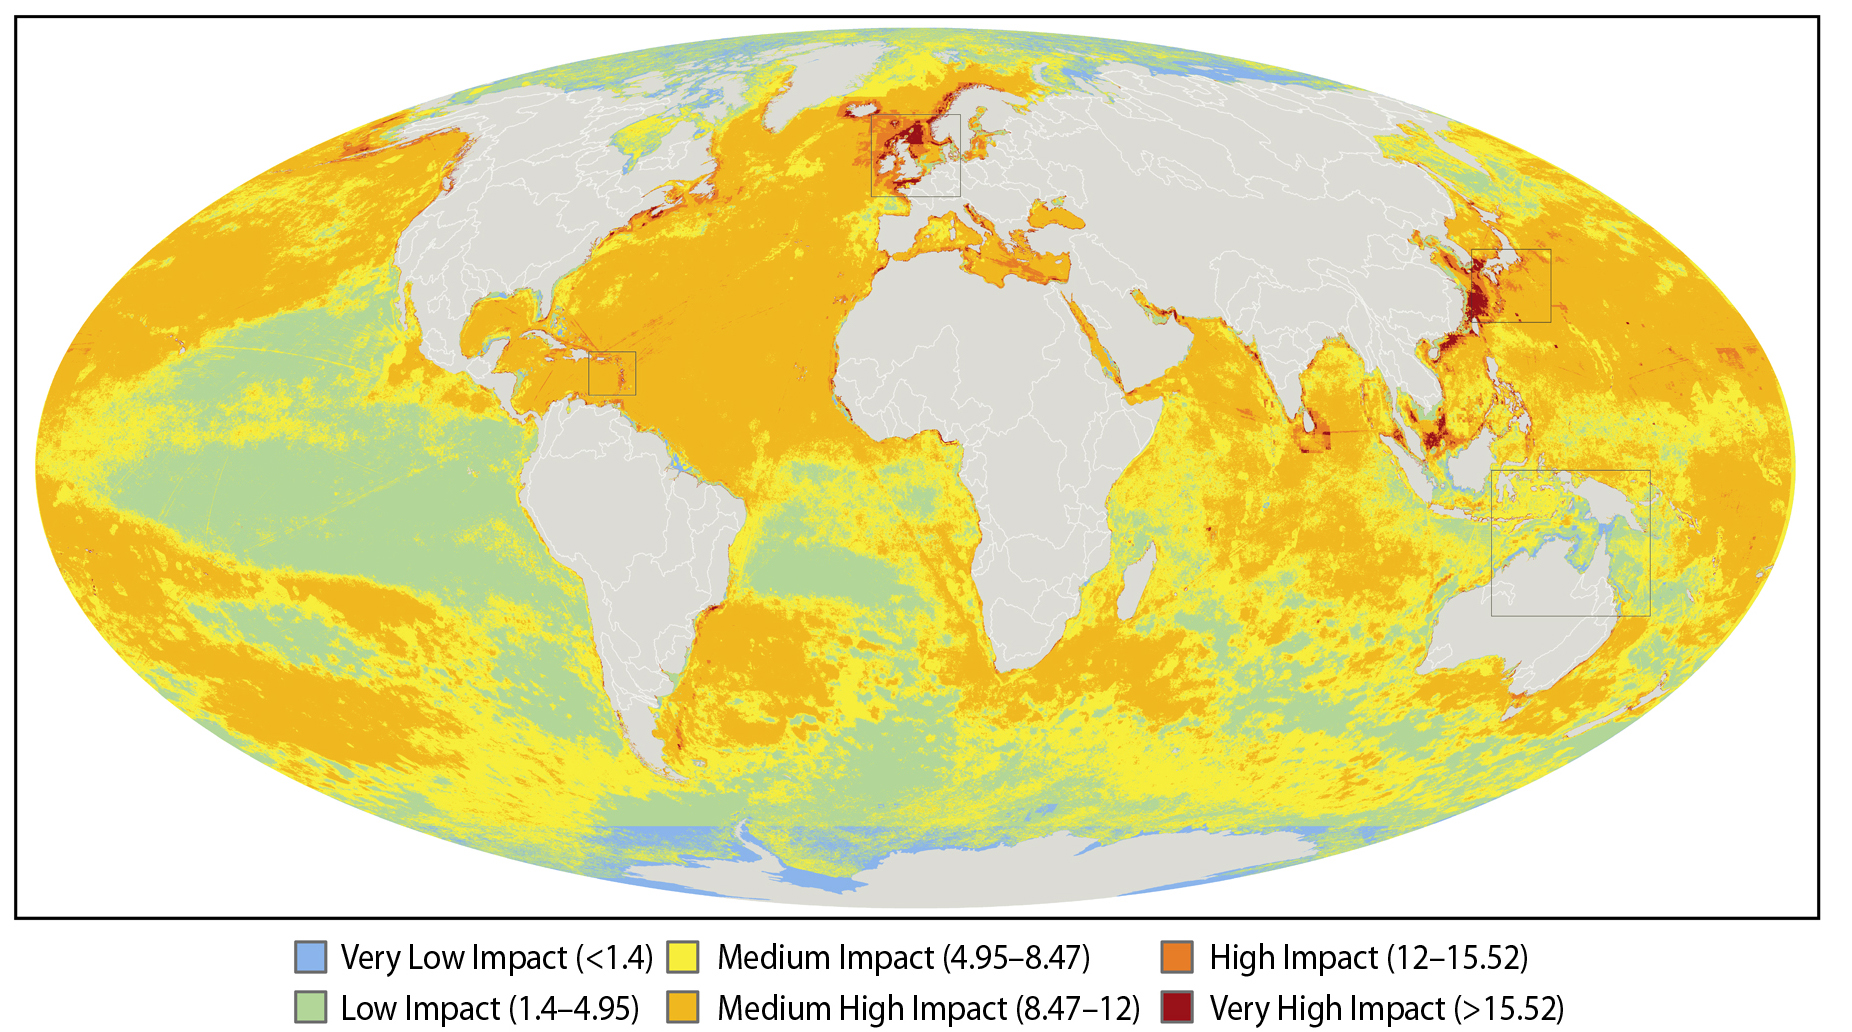 Human impact on the oceans